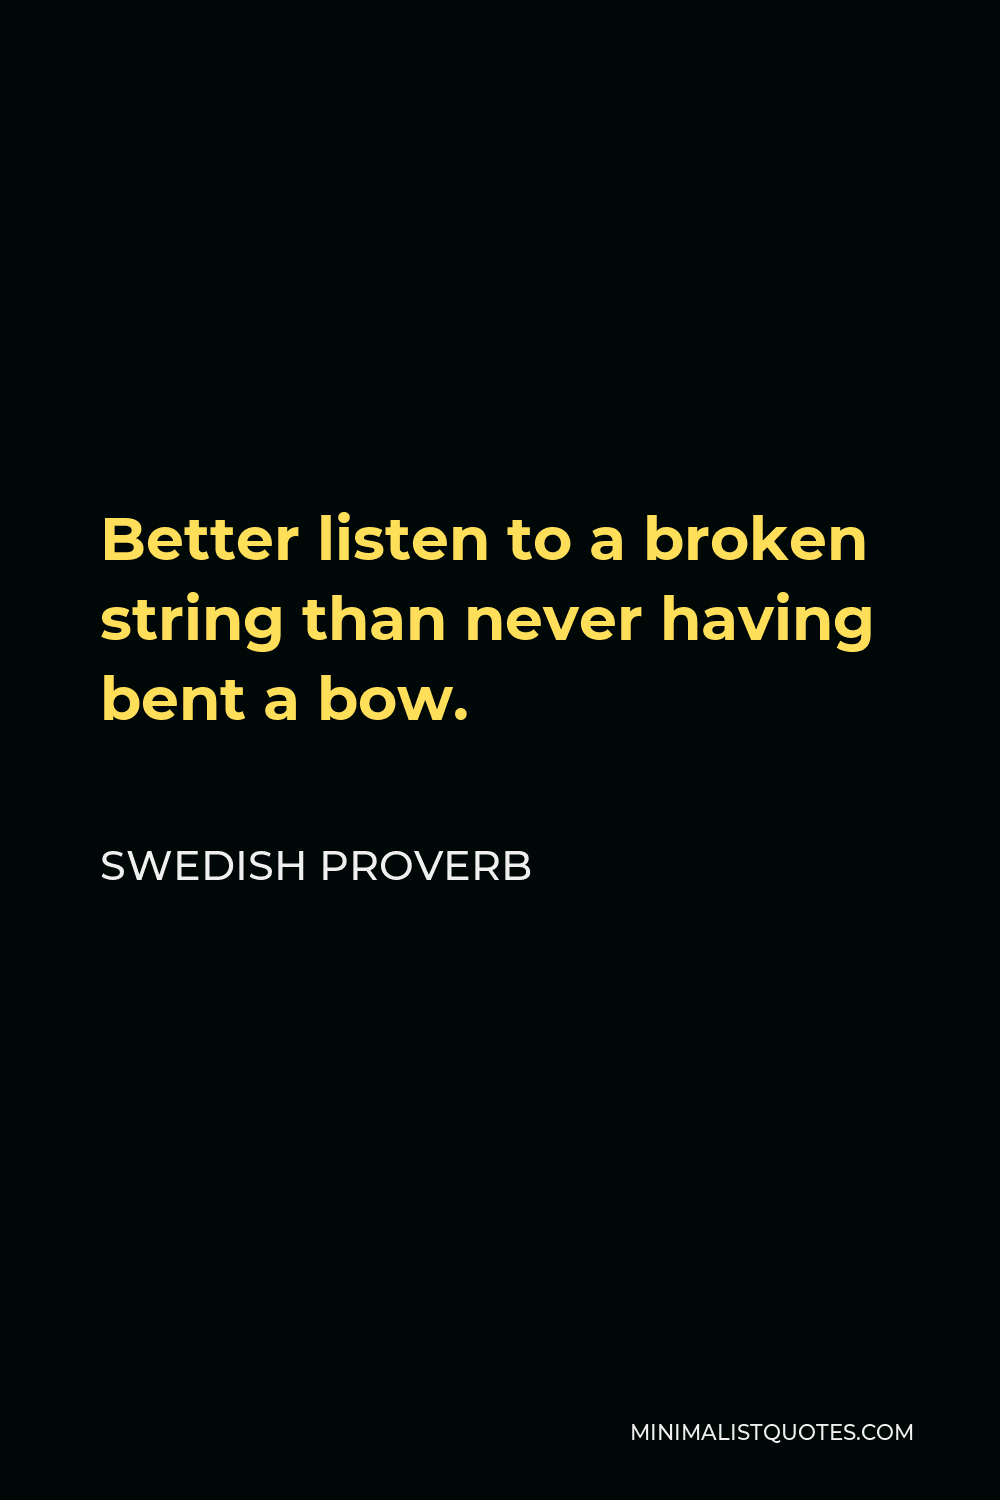 Swedish Proverb Quote - Better listen to a broken string than never having bent a bow.